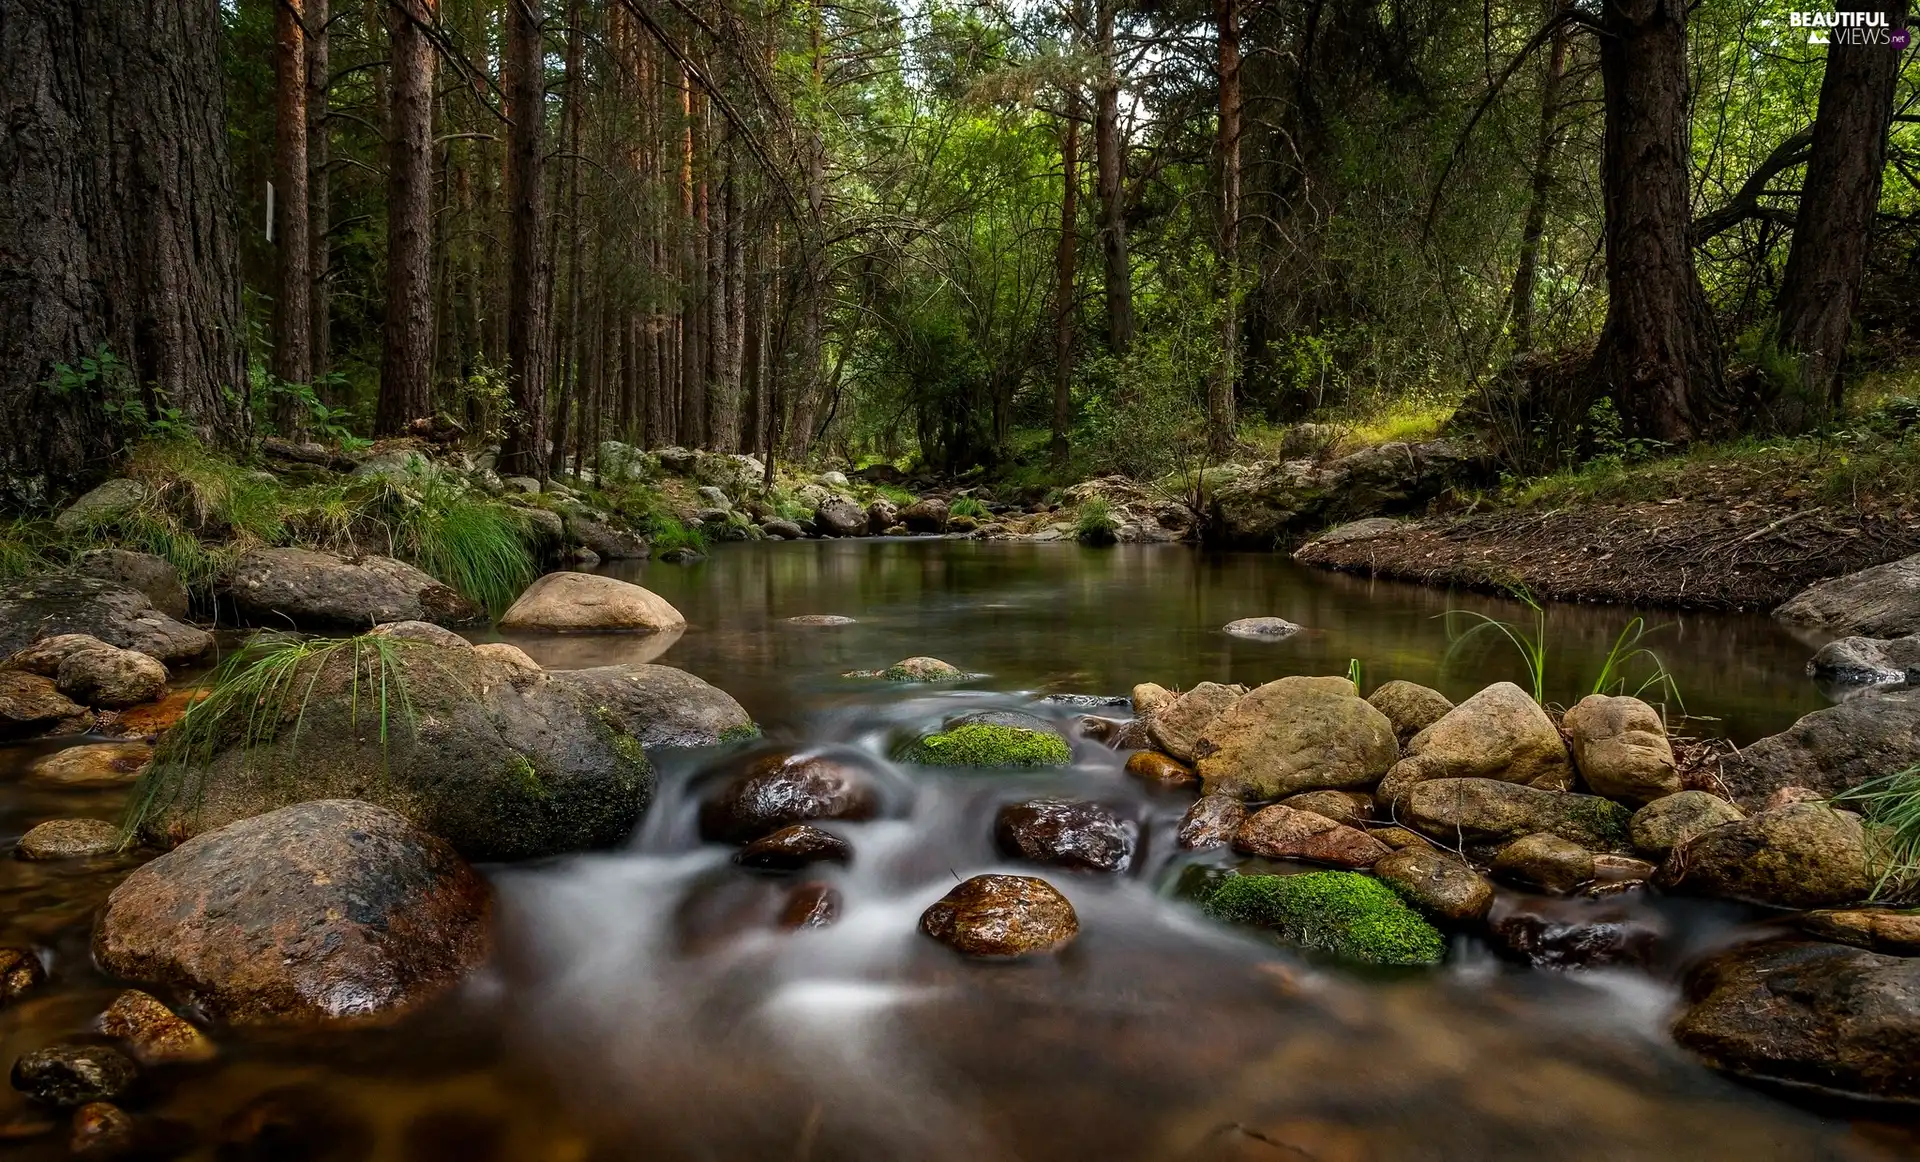 River, Stones, trees, viewes, forest